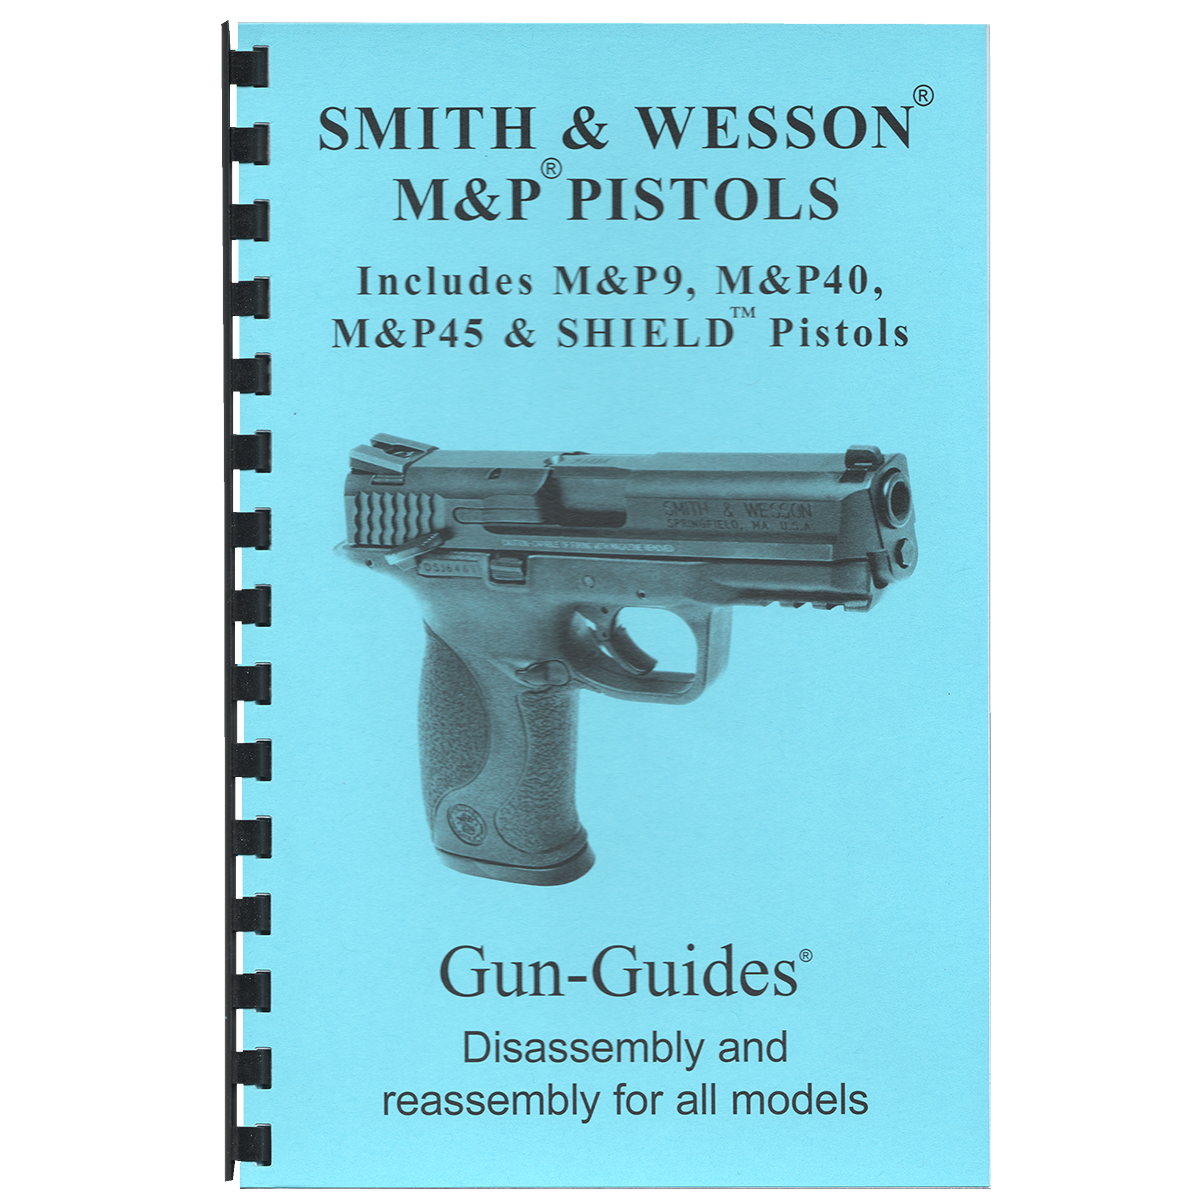 Smith & Wesson® M&P® & SHIELD® Pistols Gun-Guides® Disassembly & Reassembly for All Models